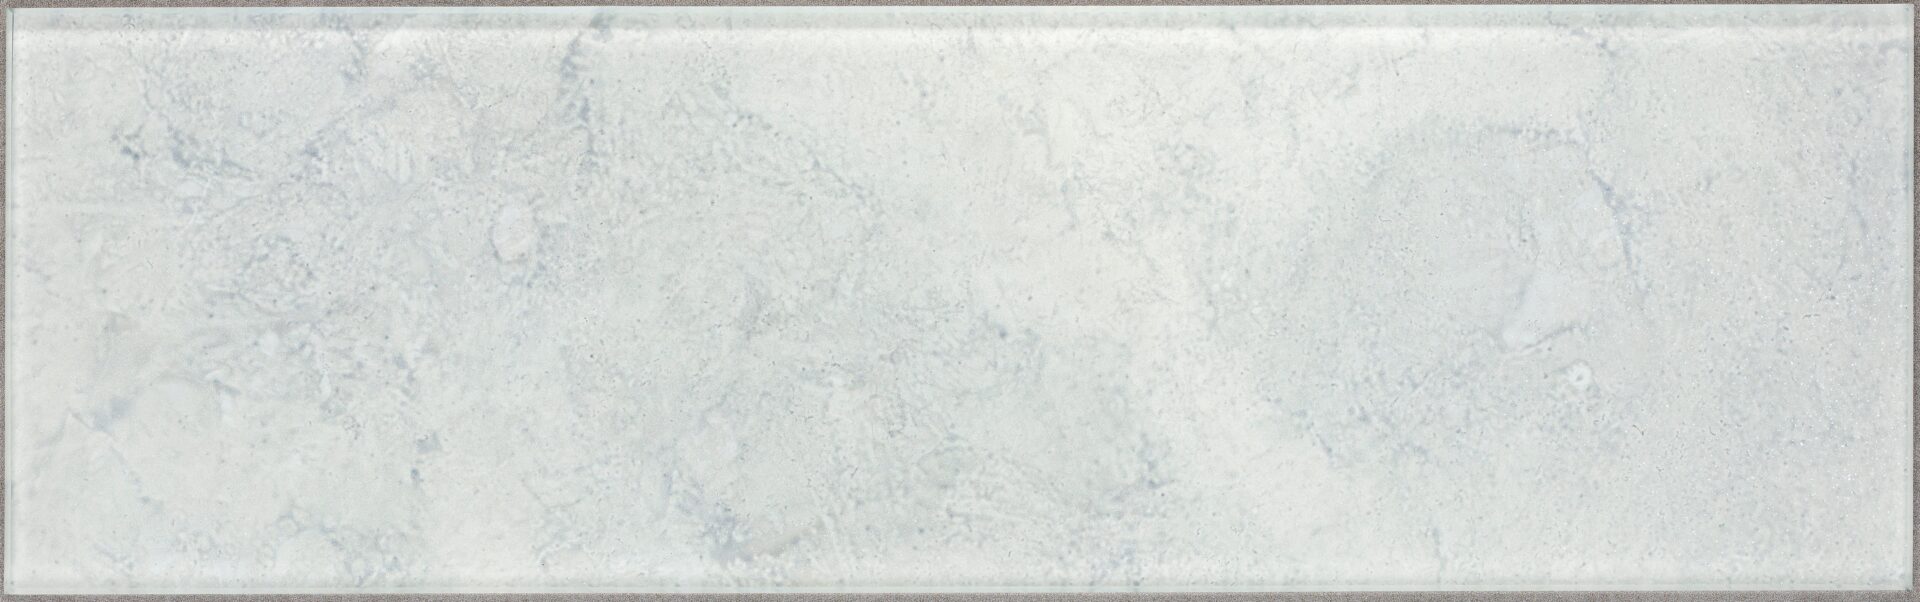 Glaxs Paper White - P 832 Porcelain, Ceramic, and Sintered Stone